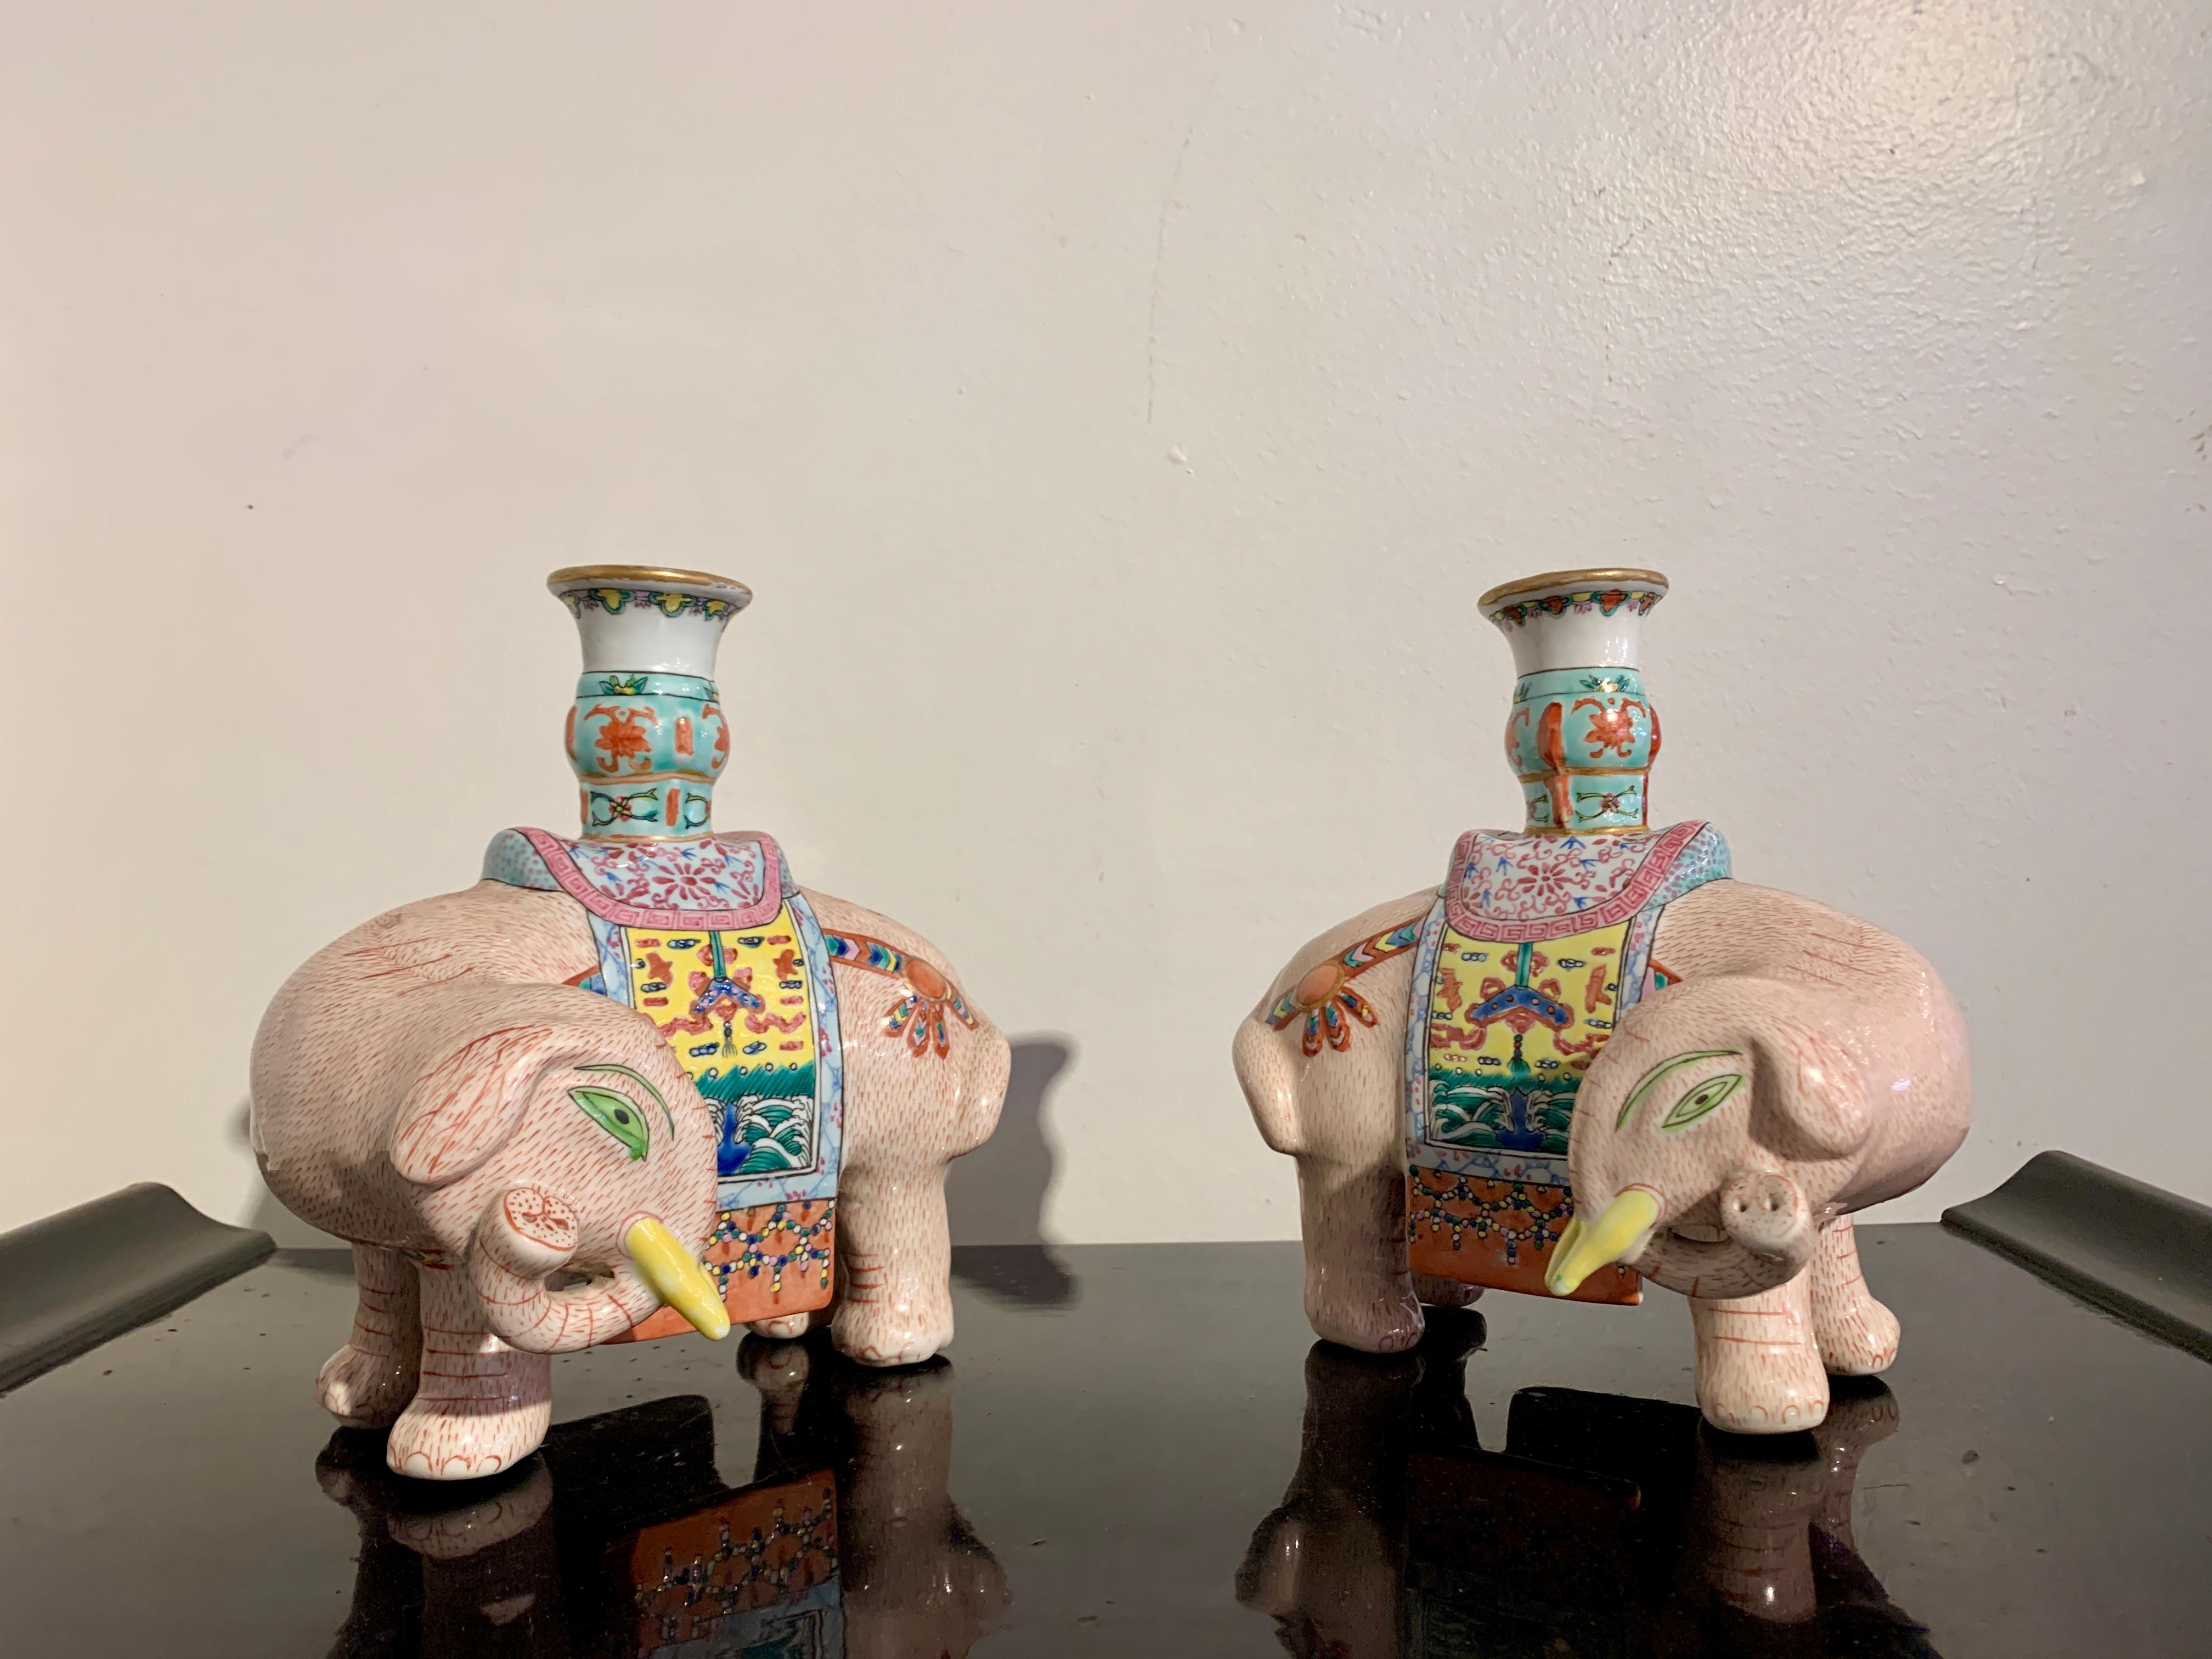 A delightful pair of Chinese export famille rose enameled porcelain candle holders, late Qing Dynasty or early Republic Period, early 20th century, China.

The whimsical pair of candleholders each formed as a sturdy elephants standing foursquare,